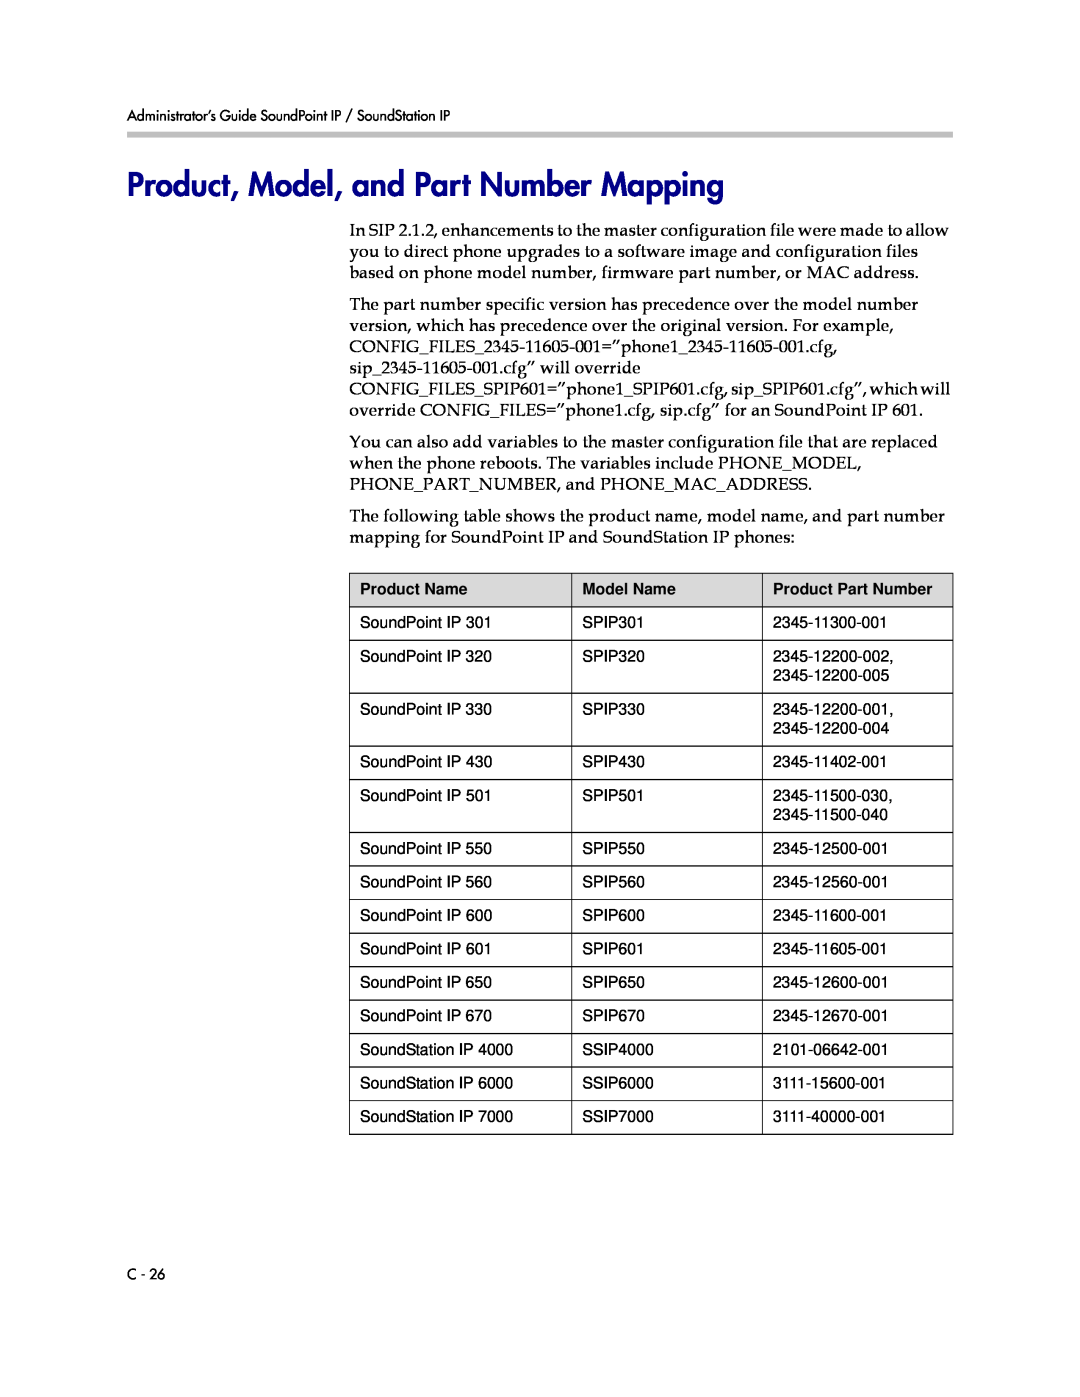 Polycom SIP 3.1 manual Product, Model, and Part Number Mapping, Product Name, Model Name, Product Part Number 